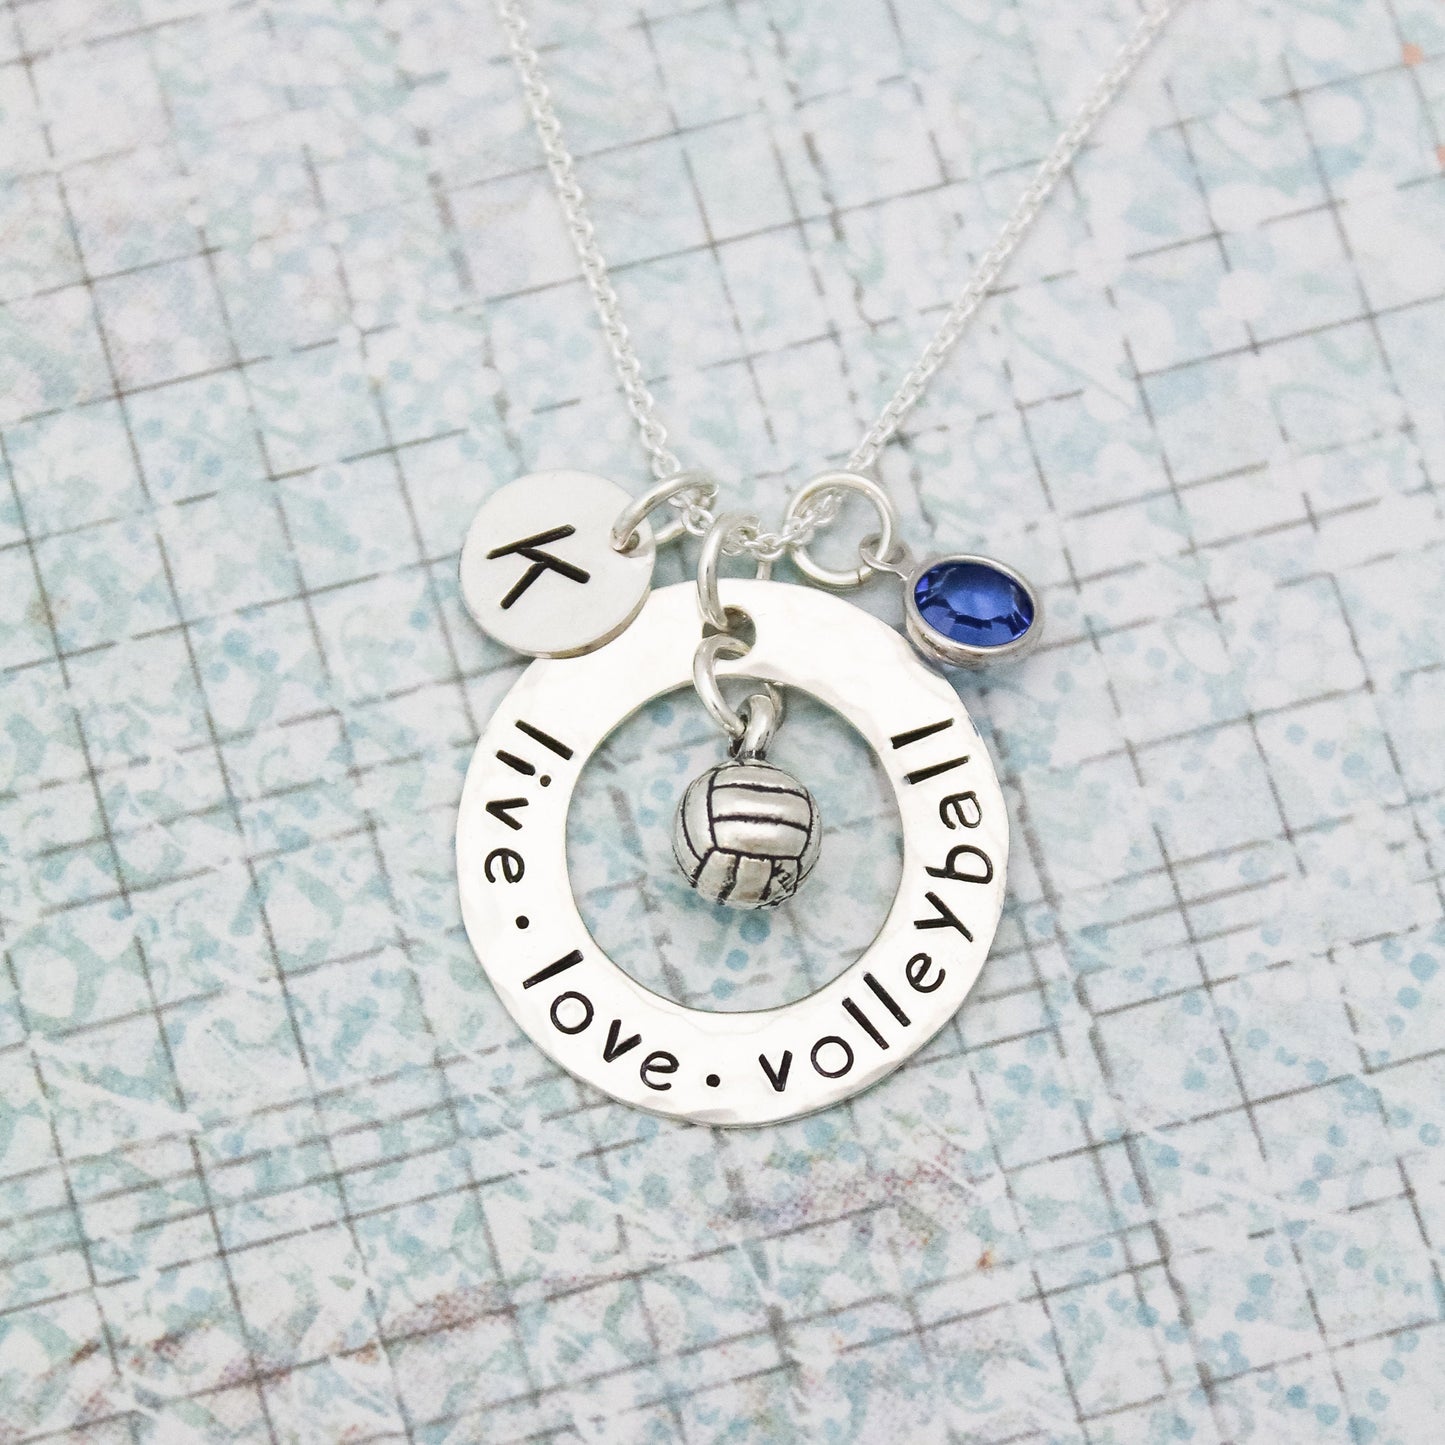 Personalized Volleyball Necklace, Volleyball Jewelry, Volleyball Team Necklace, Sterling Silver Sports Necklace, Hand Stamped